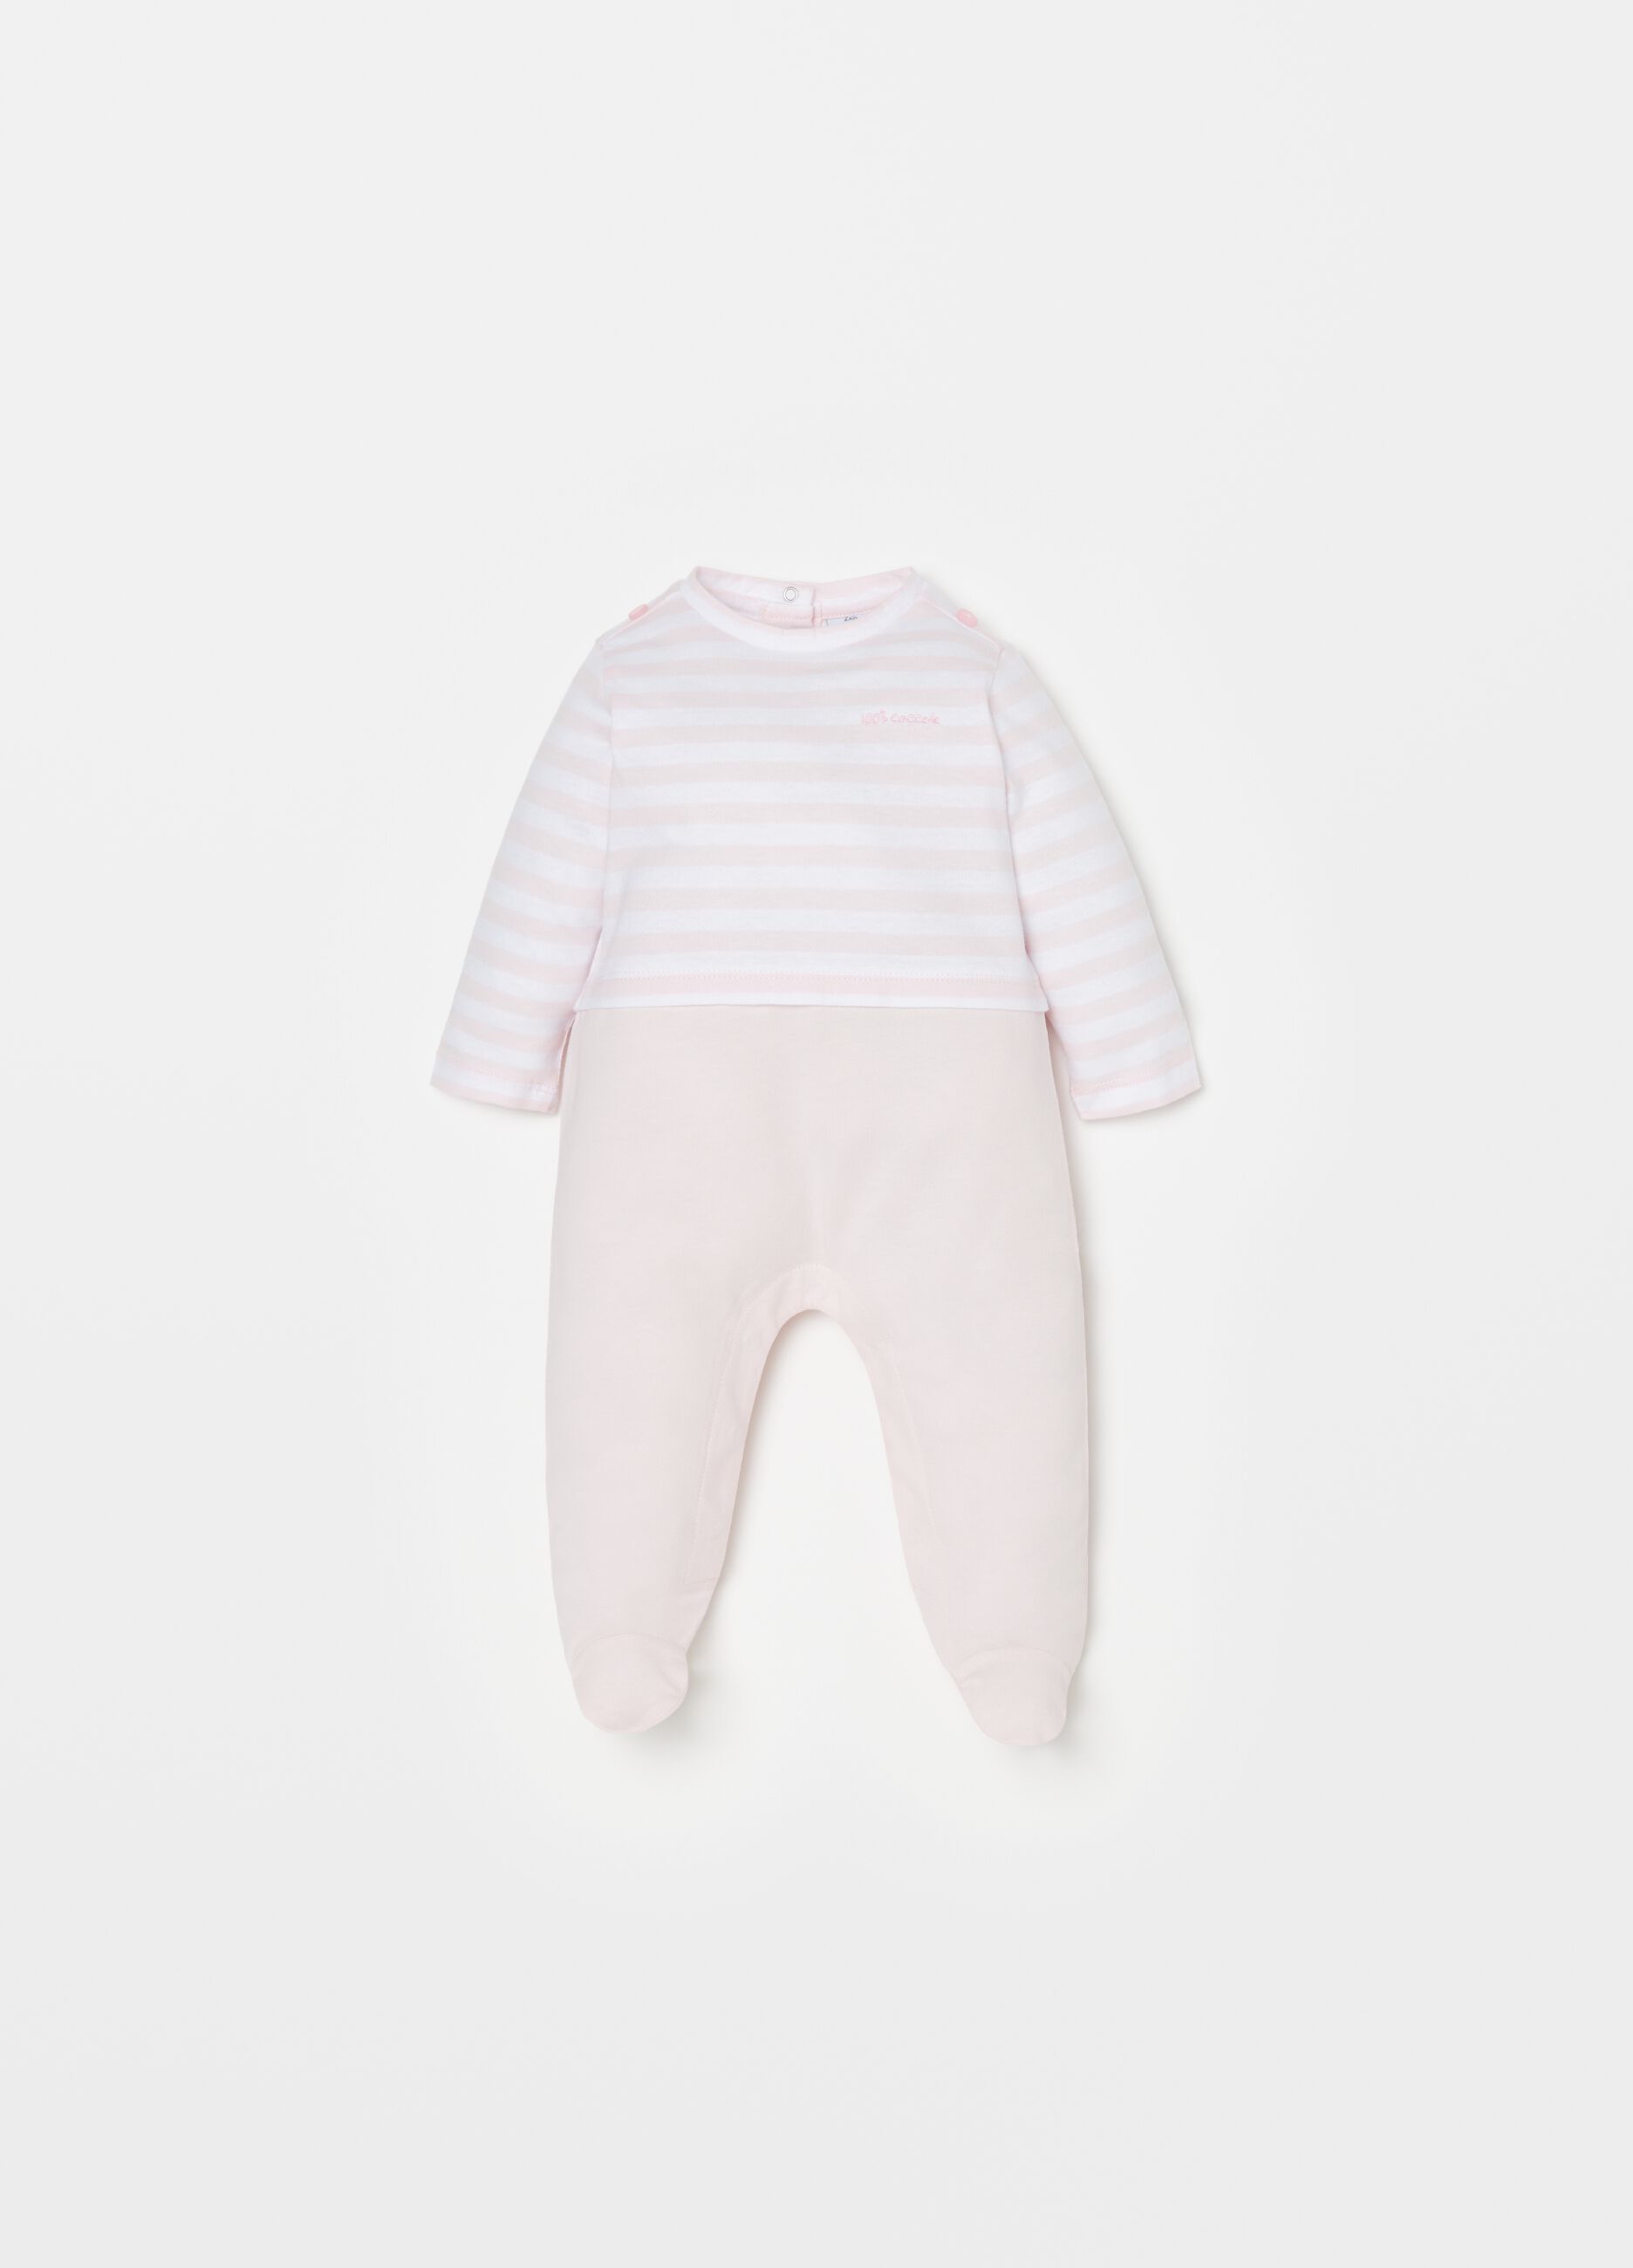 Cotton onesie with feet and striped top